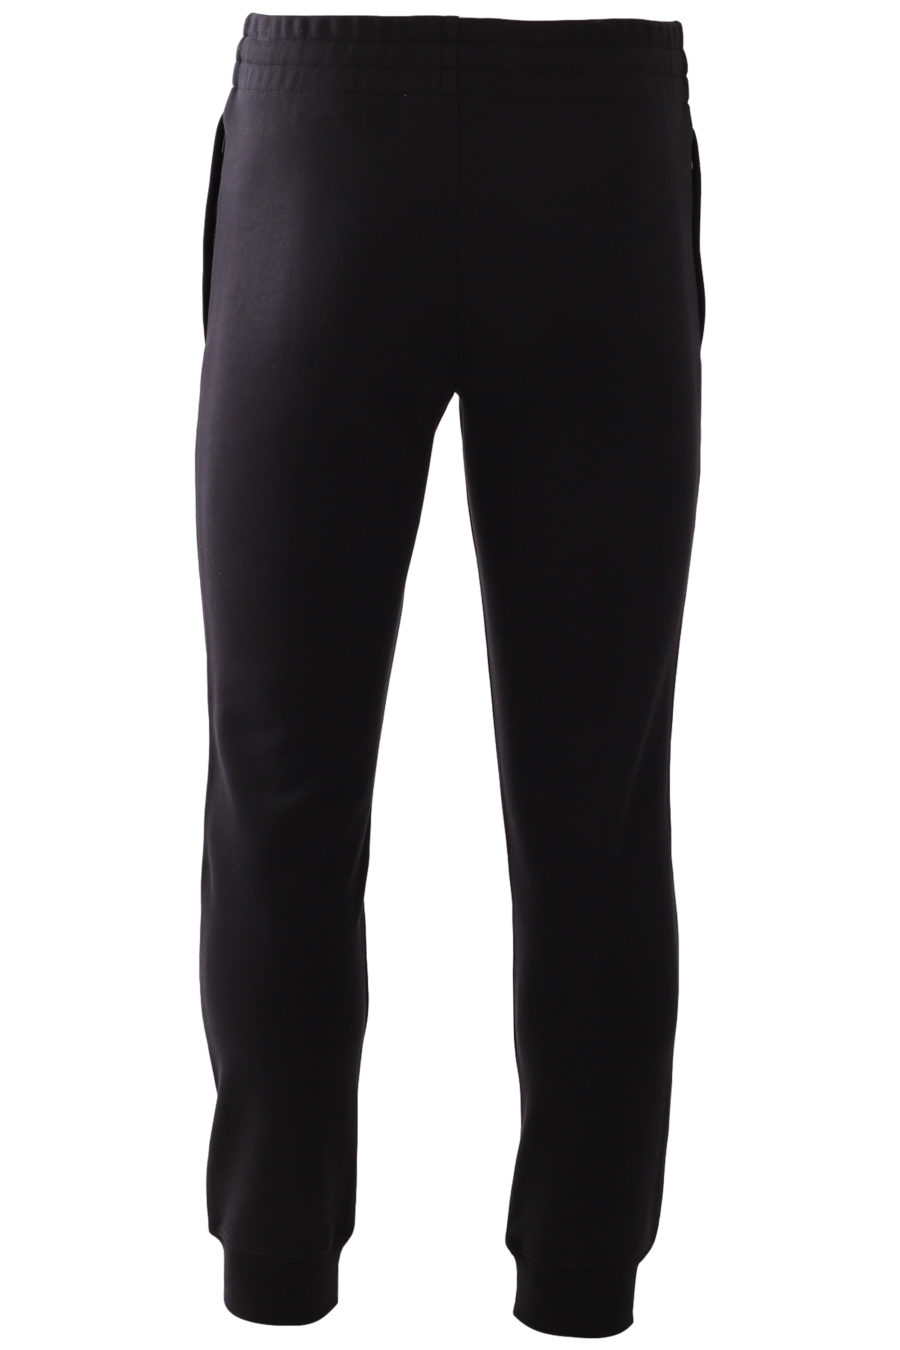 Tracksuit bottoms black with double logo question - 26a1b1ccf314259ade62f6b8d2459f2b4b9eb10b